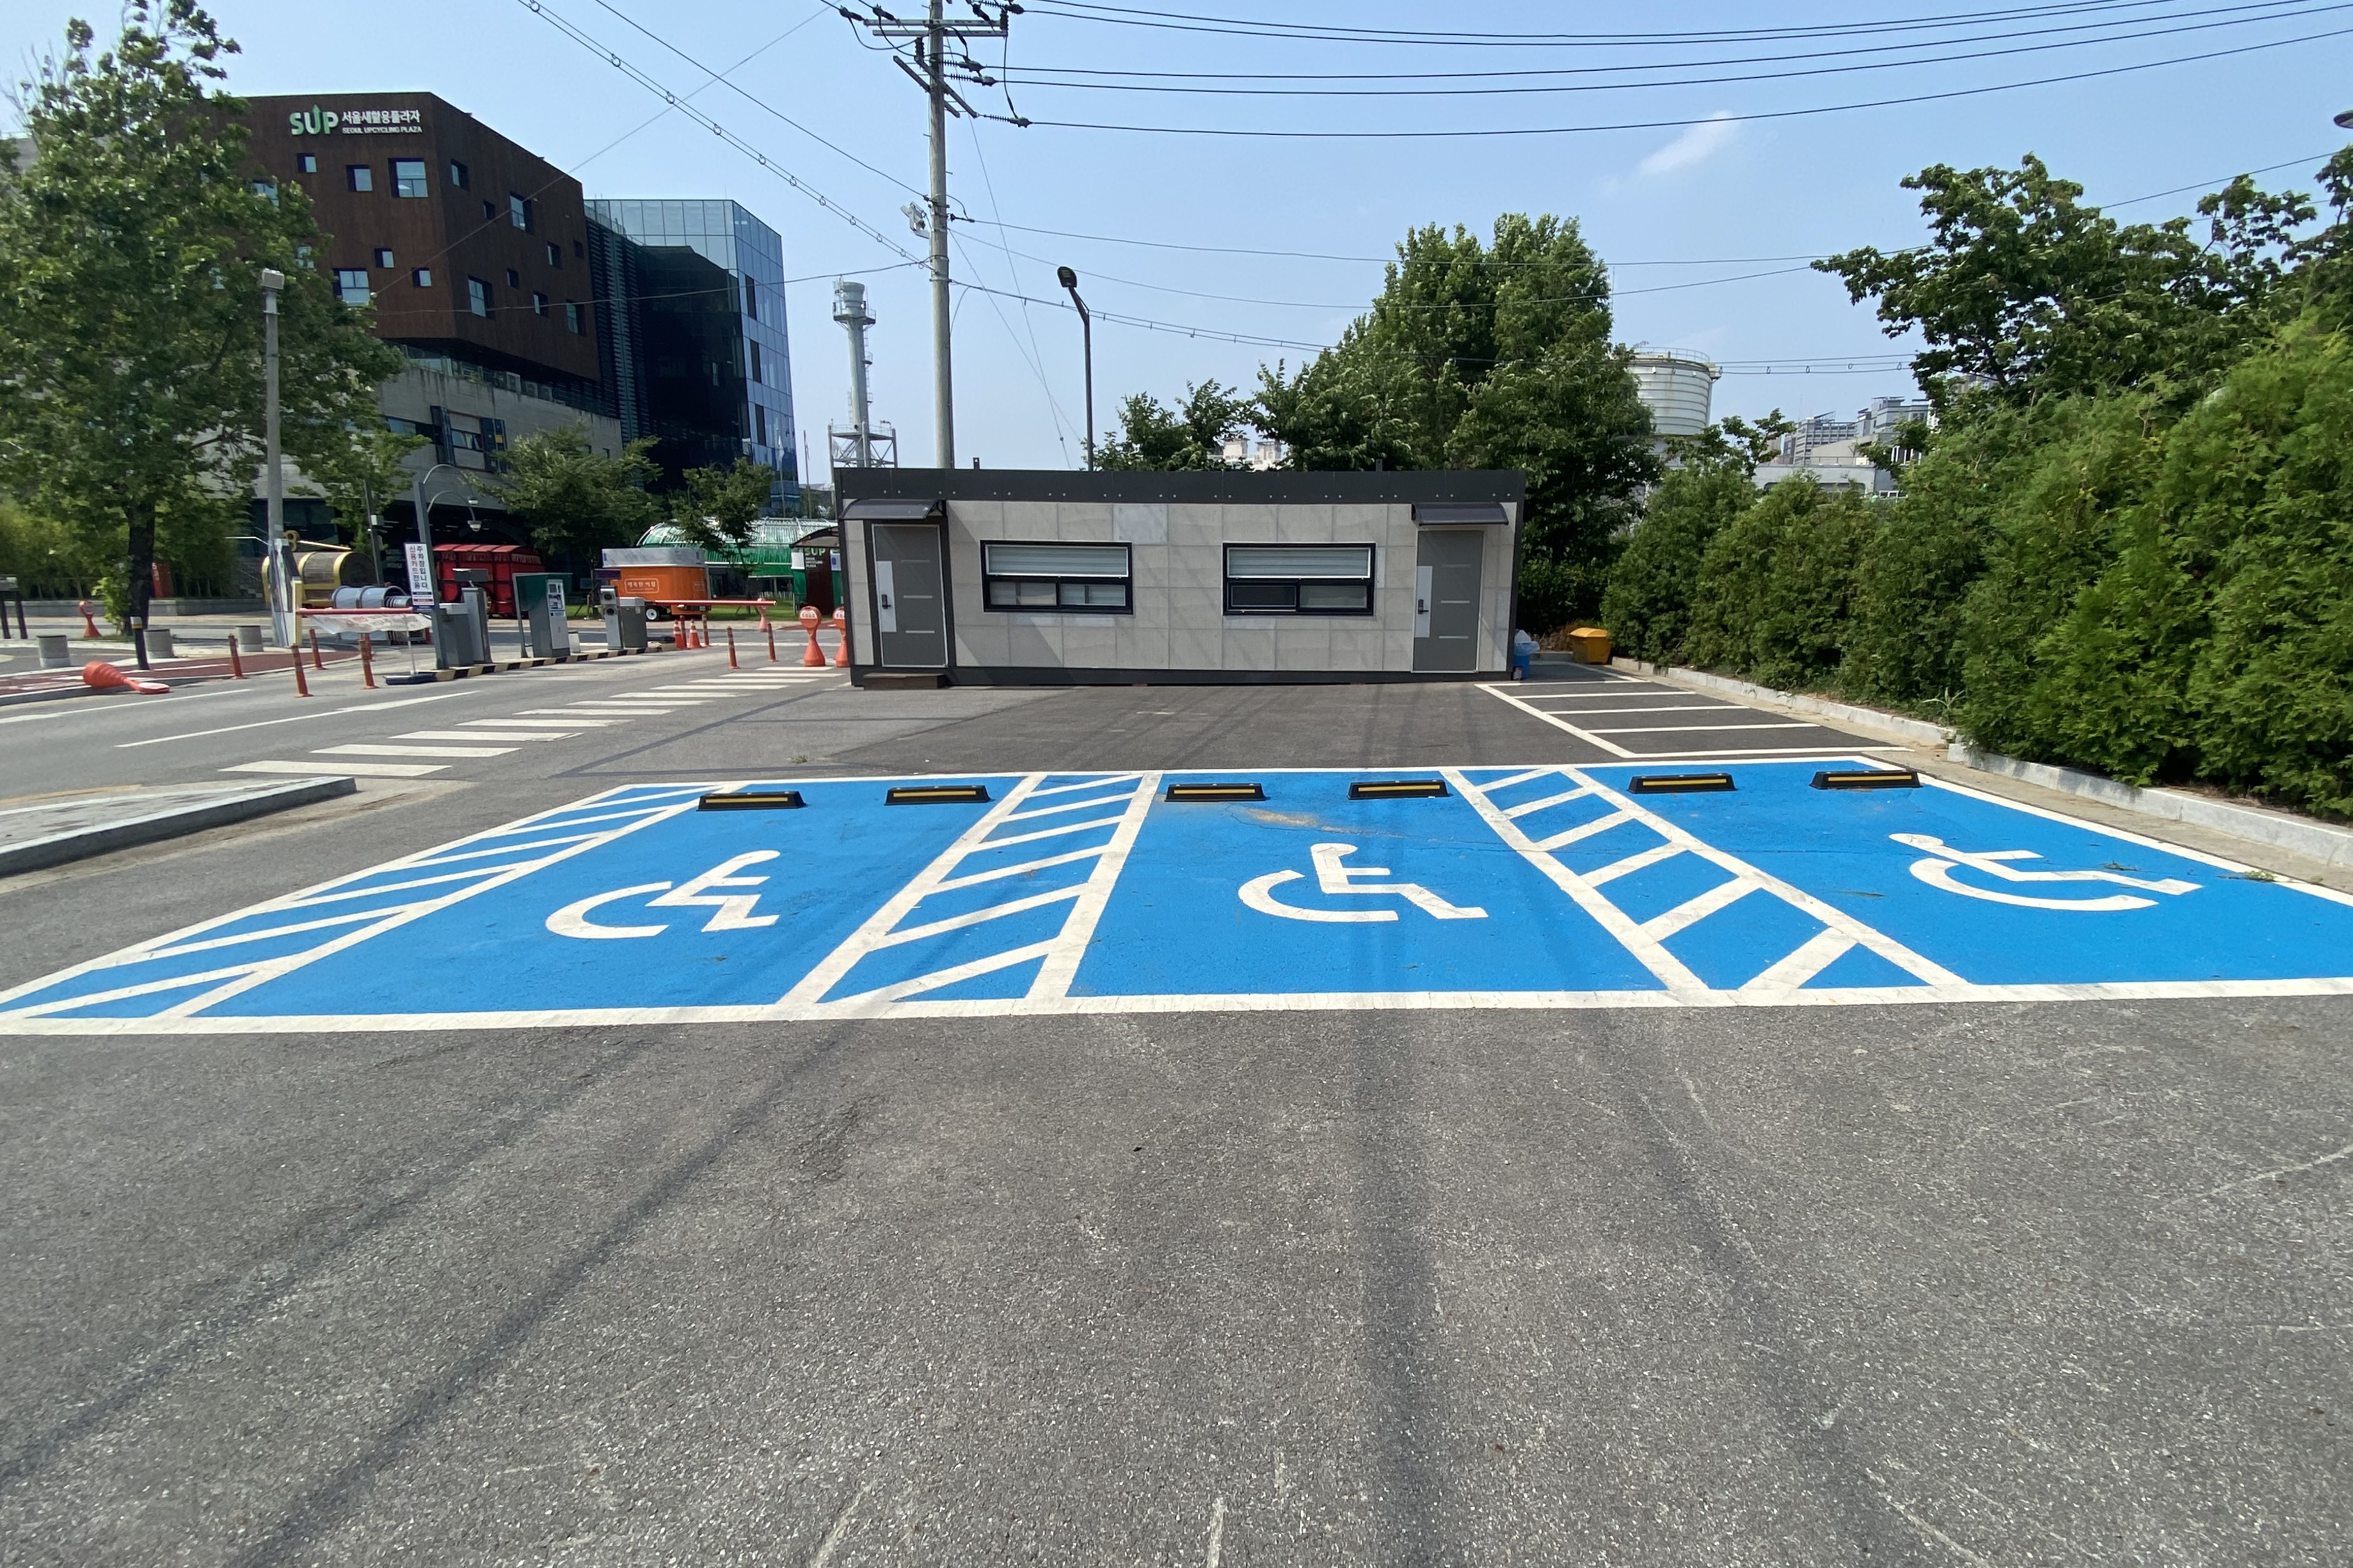 Accessible parking lots0 : Accessible parking lots in Seoul Sewerage Science Museum